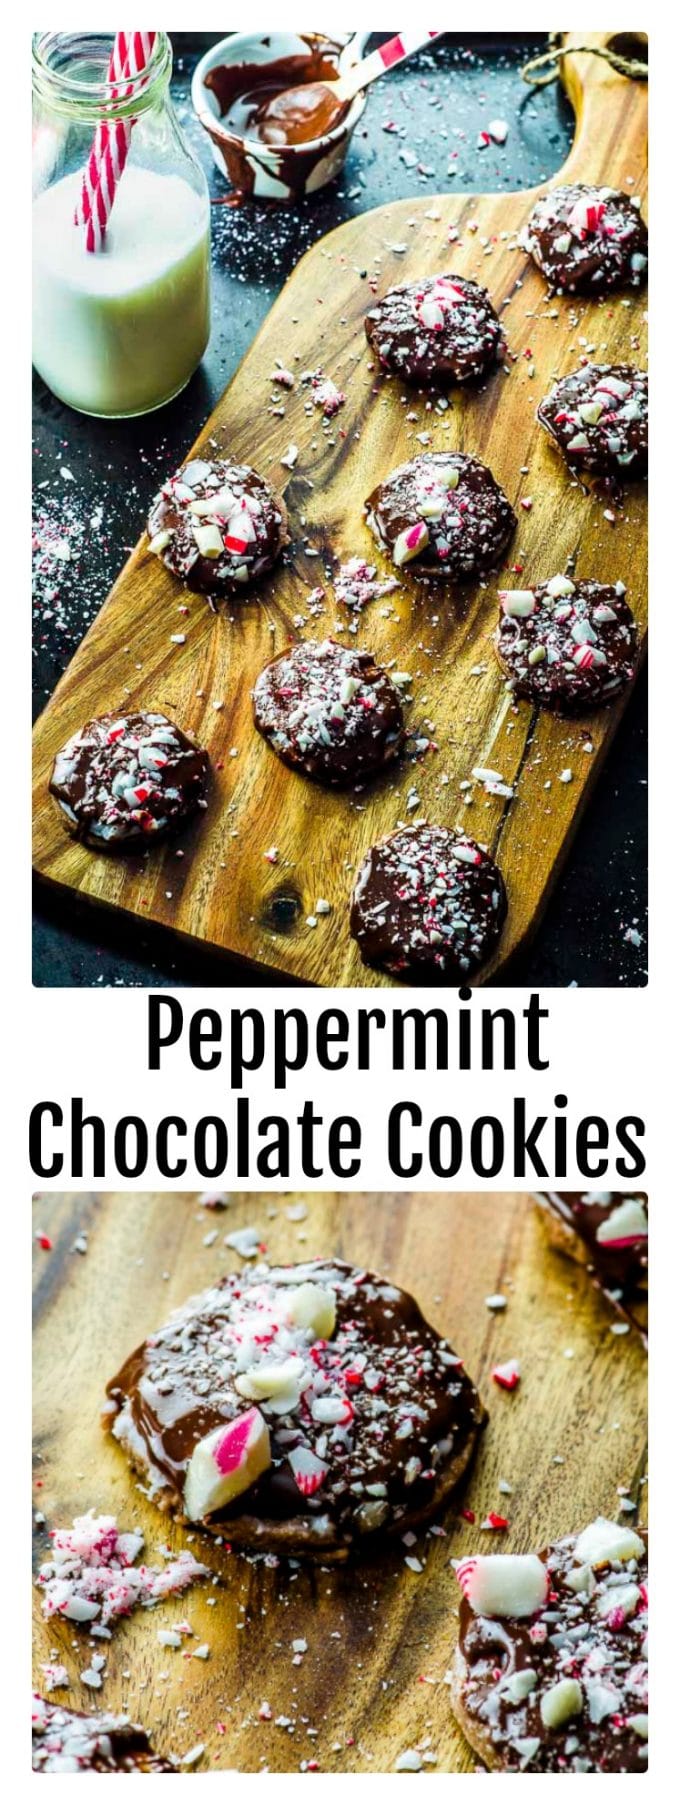 Vegan peppermint chocolate cookies: Chocolate and peppermint is the winning flavor combination, that transforms a regular cookie into a " super cookie".